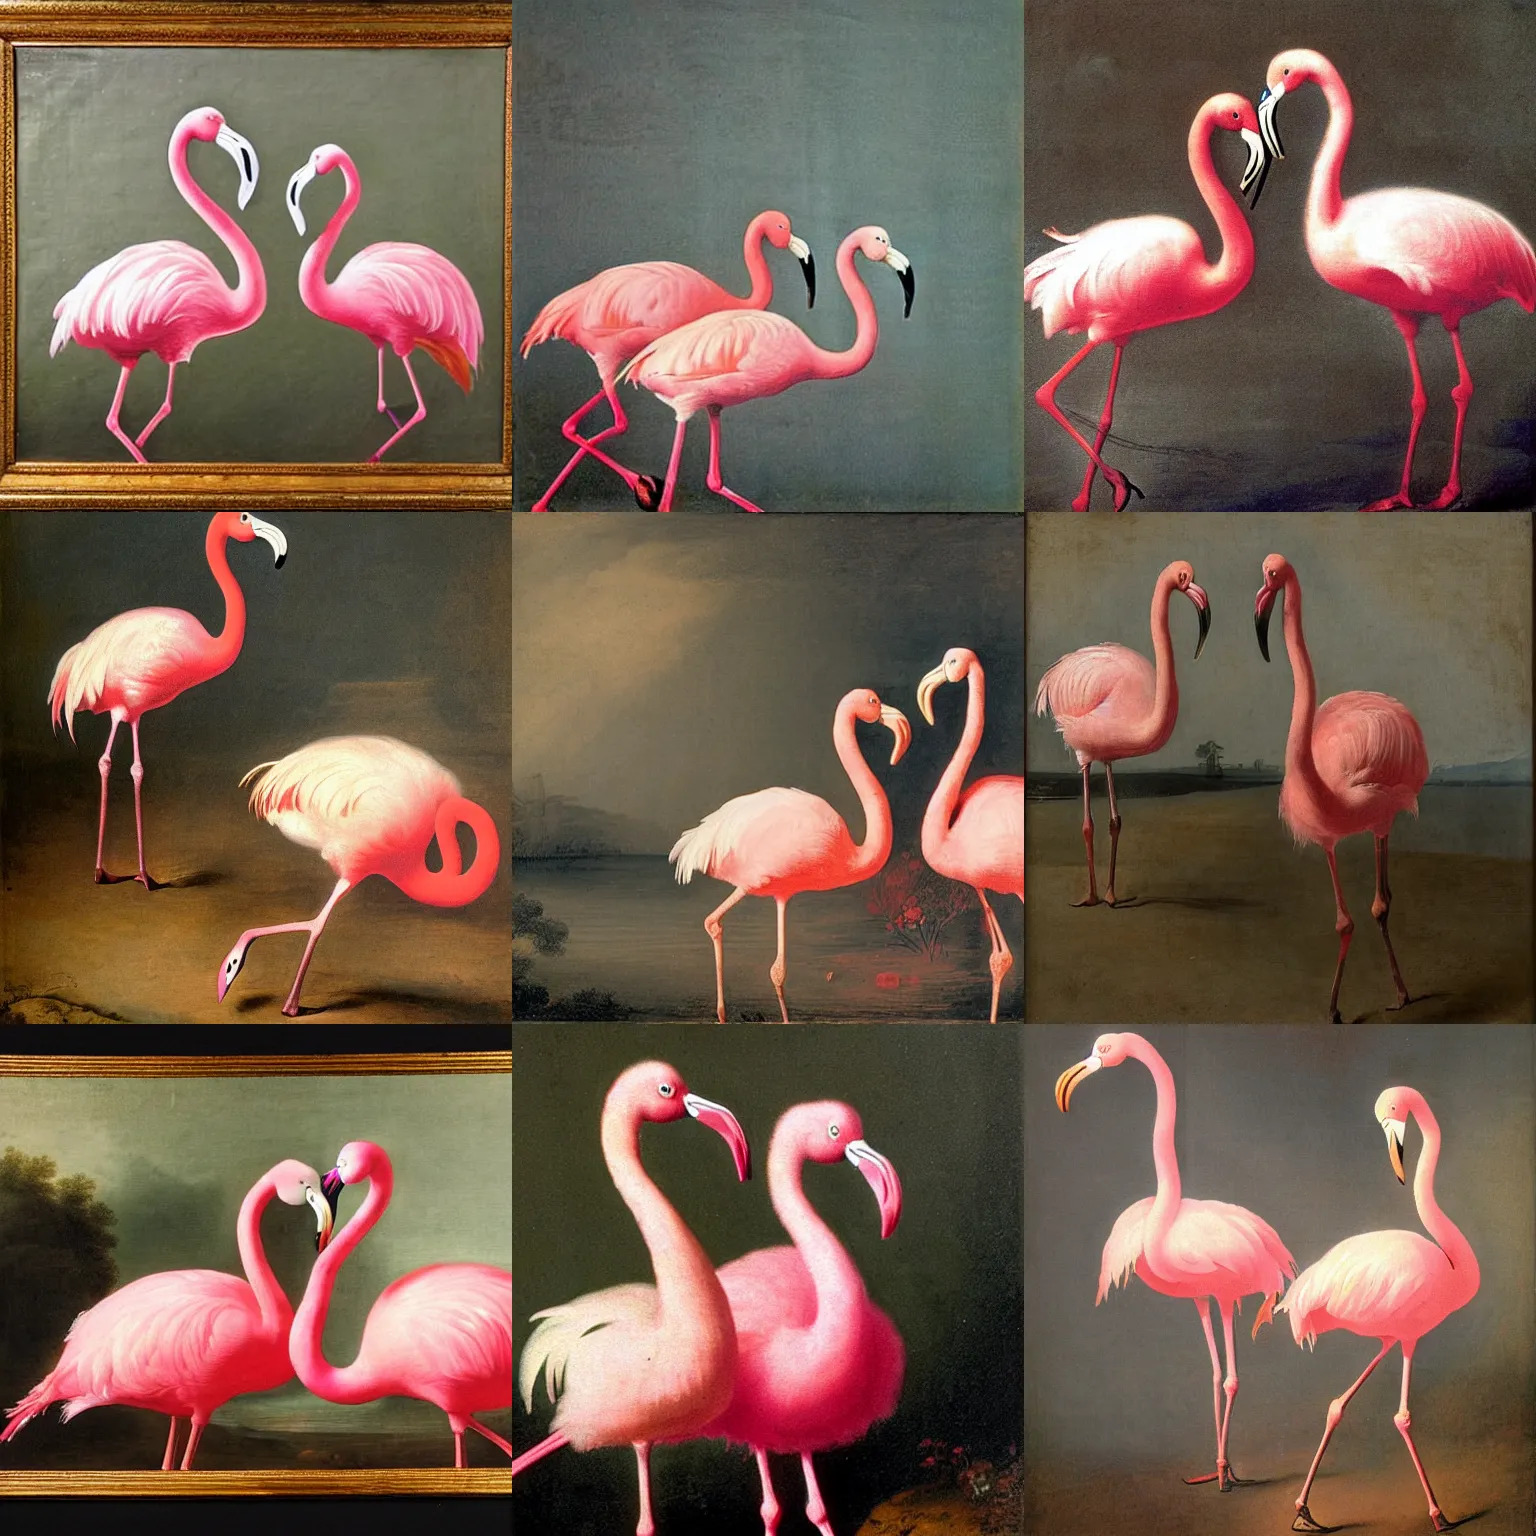 Prompt: a 1 7 0 0 s painting of two pink flamingos by rembrandt